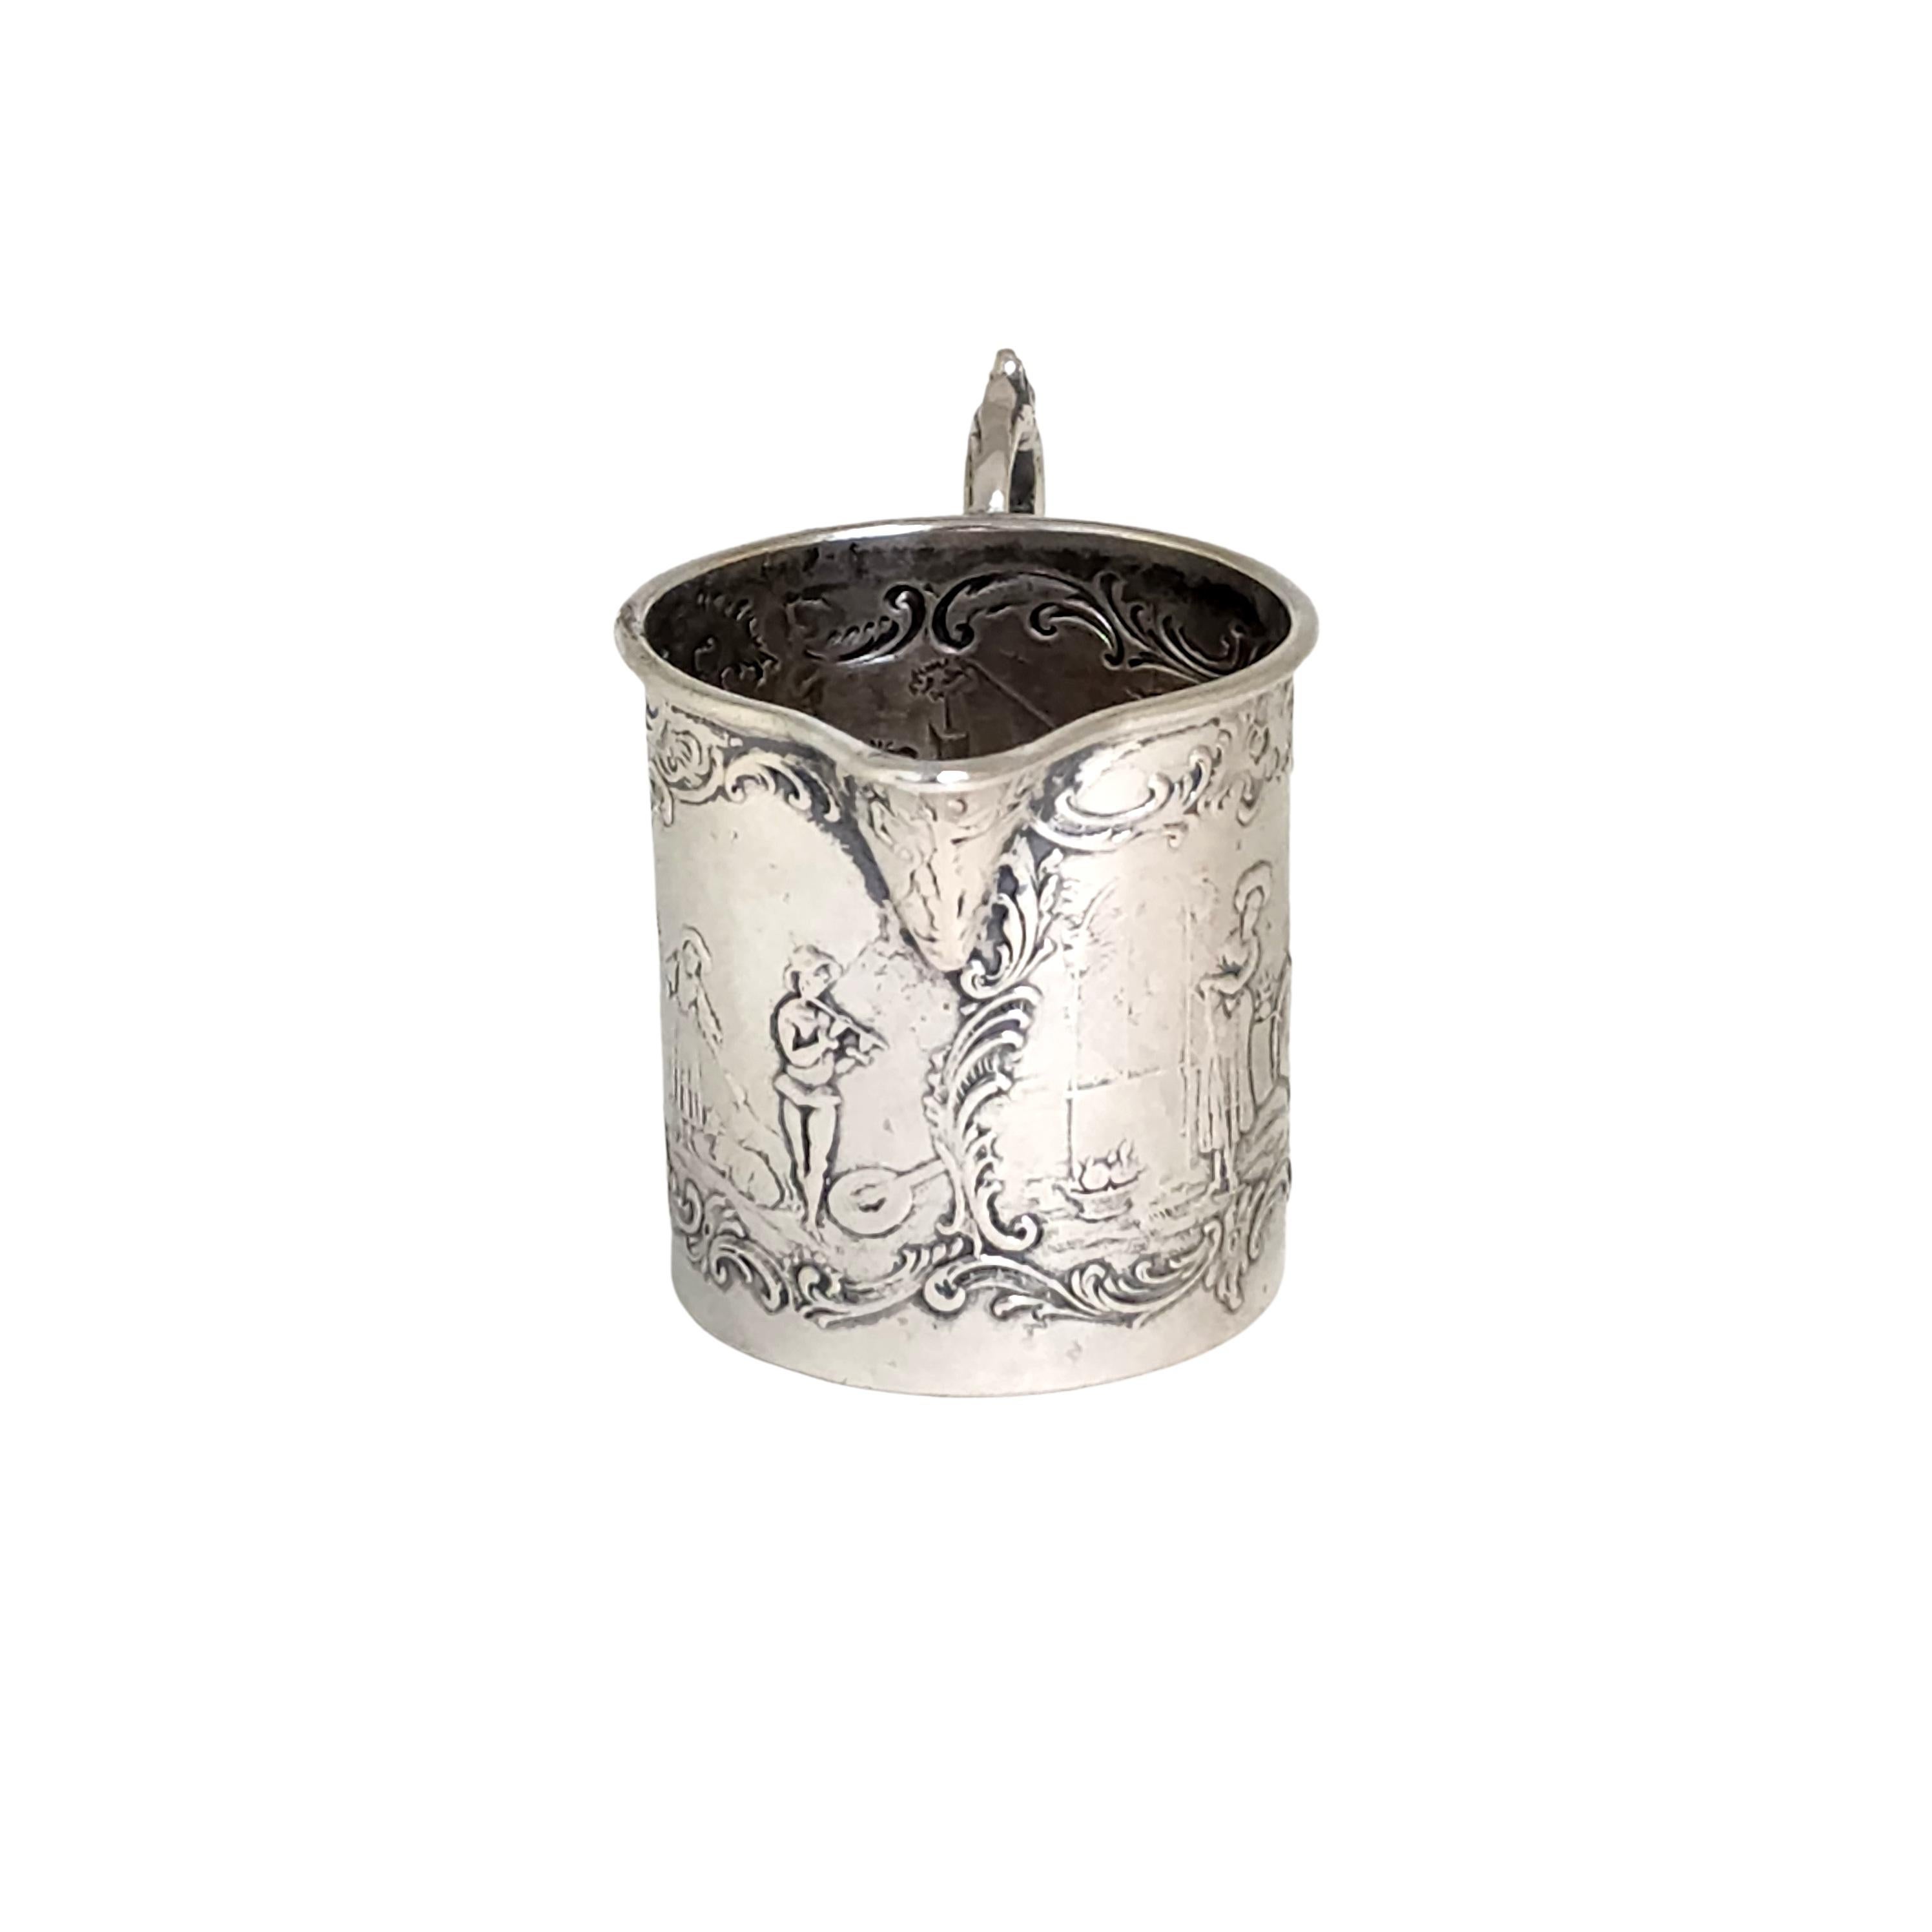 800 silver creamer from German silversmith Friedrich Reusswig.

Village scenes surround this creamer from Hanau Germany.

Measures approx 2 1/8